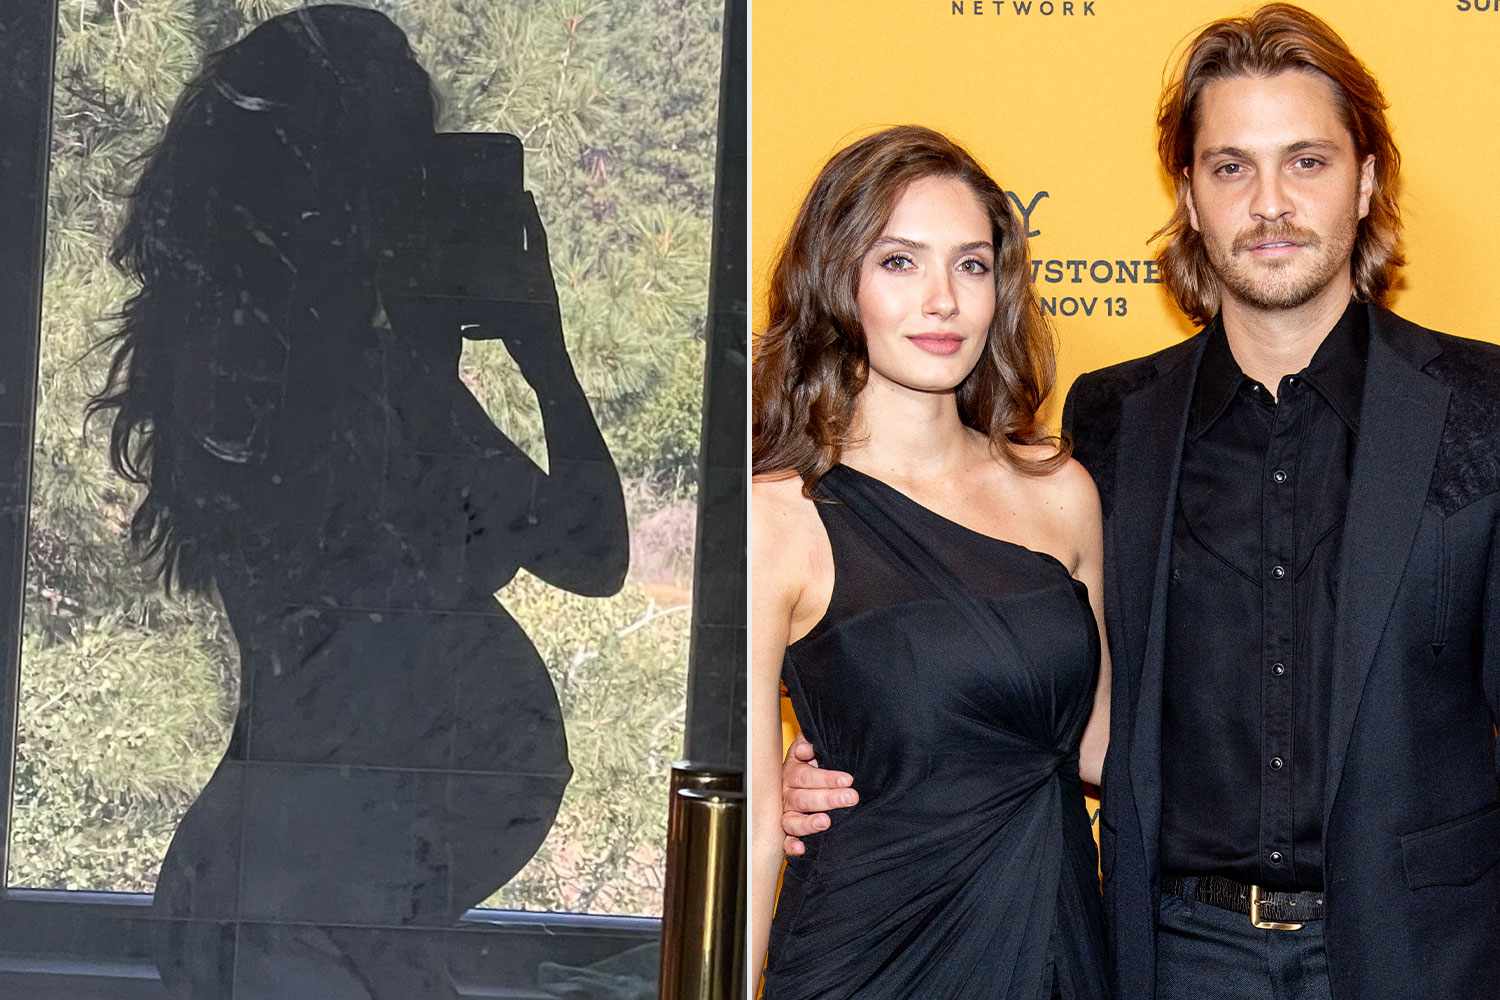 'Yellowstone' Star Luke Grimes and Wife Bianca Are Expecting Their First Baby: 'Can't Wait to Meet You'